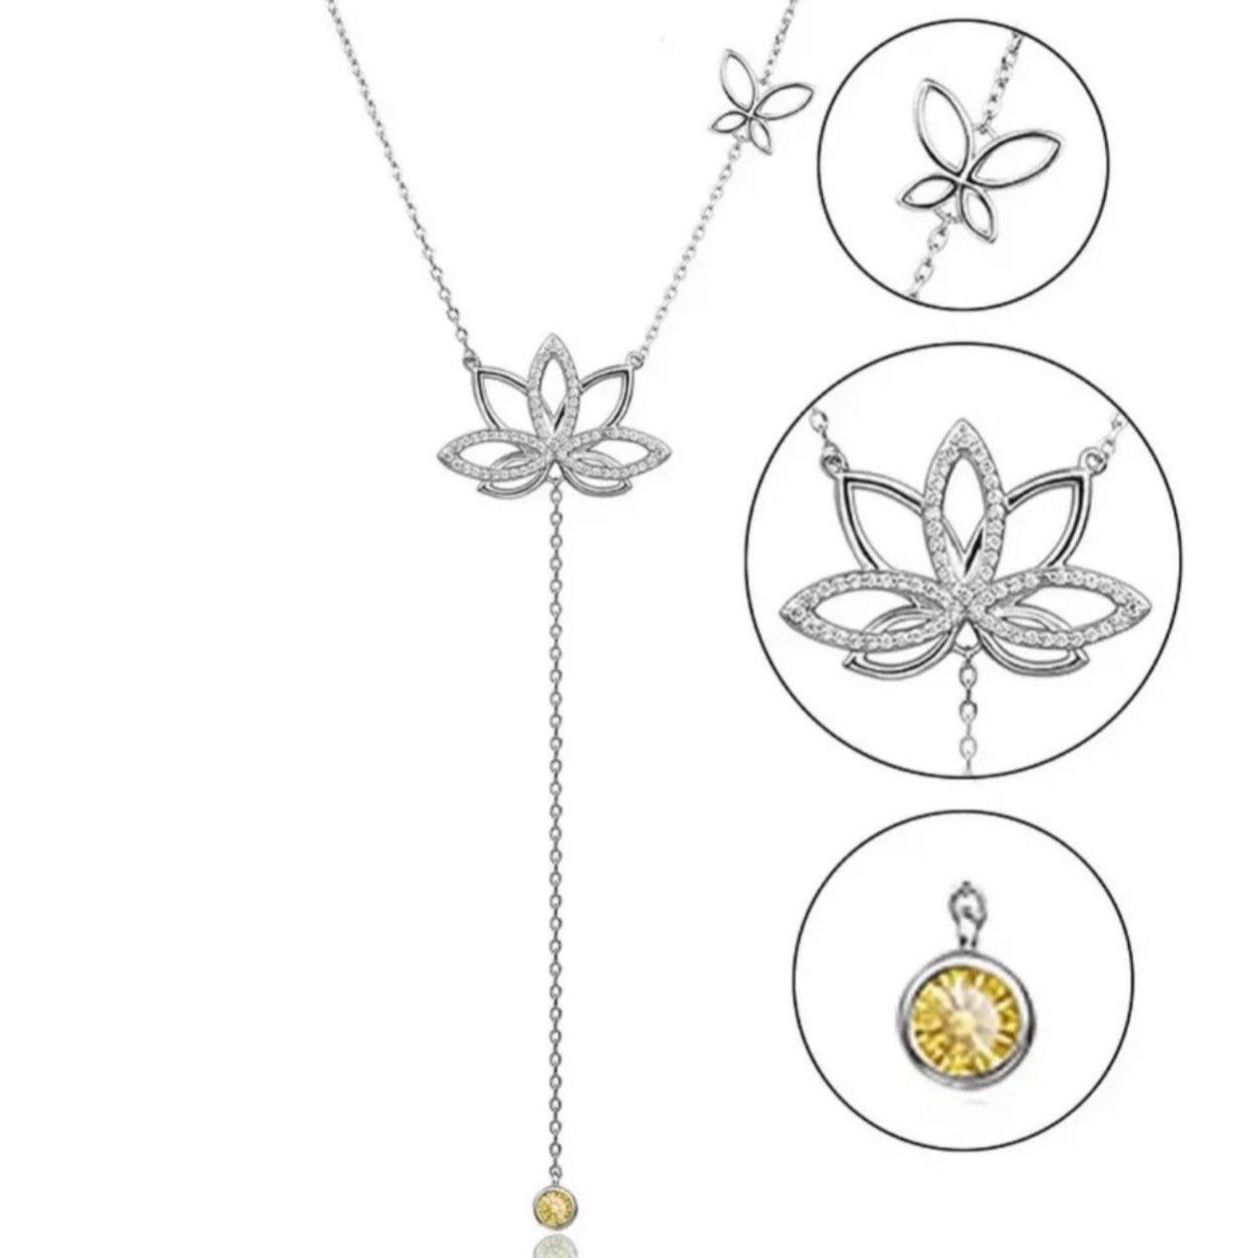 STUNNING New Stunning Lotus And Butterfly Sterling Silver Zircon Women’s Necklace Jewelry